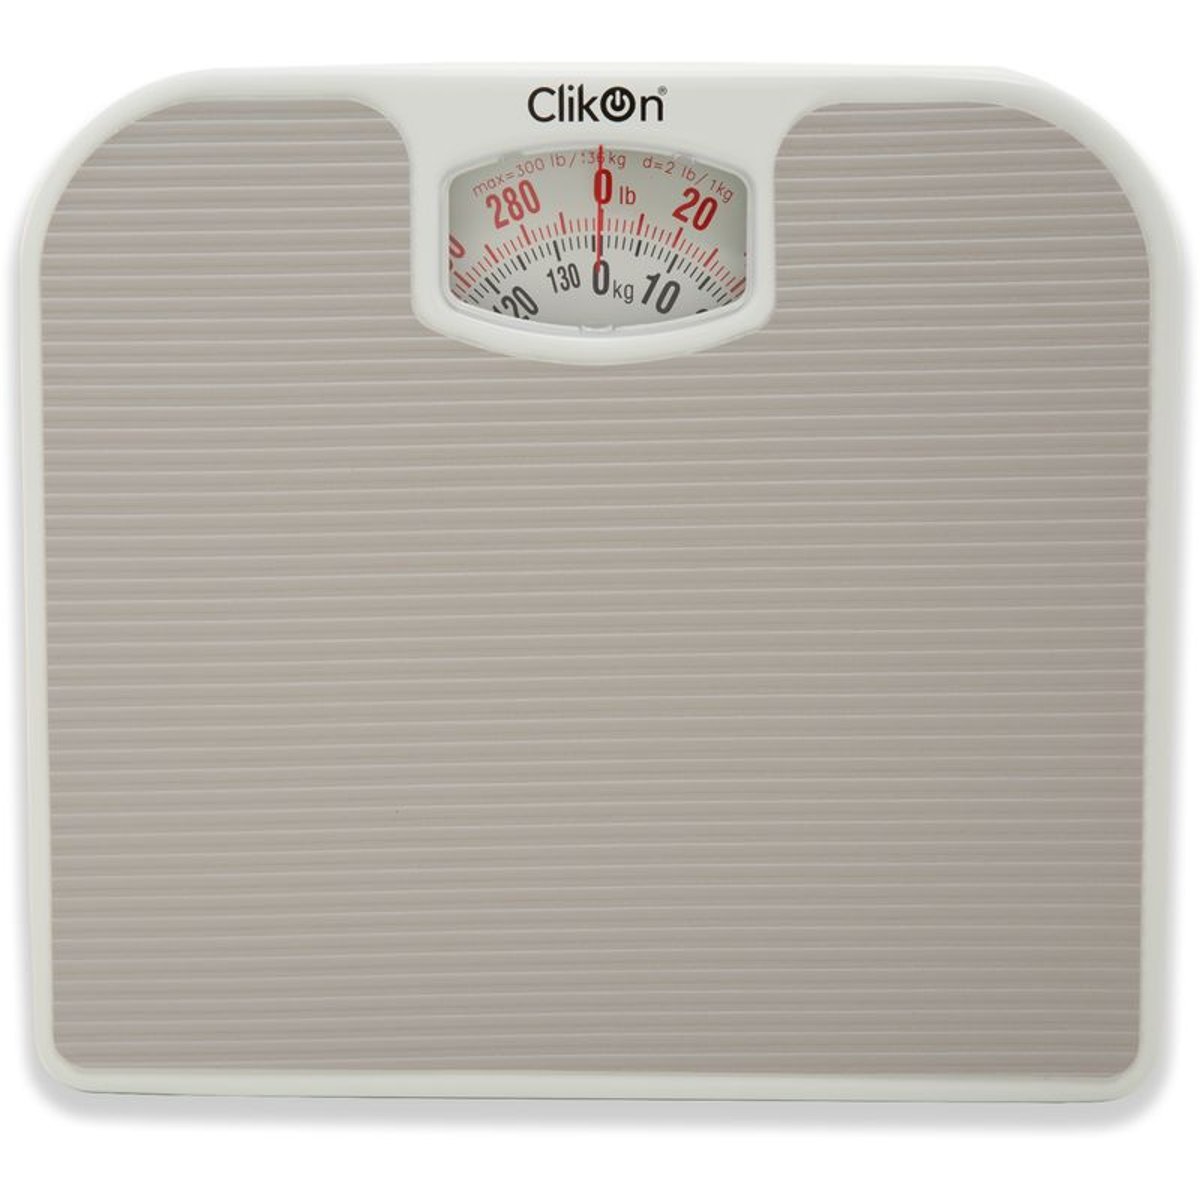 Geepas Weighing Scale - Analogue Manual Mechanical Weighing Machine for  Human Bodyweight machine, 125Kg Capacity, Bathroom Scale